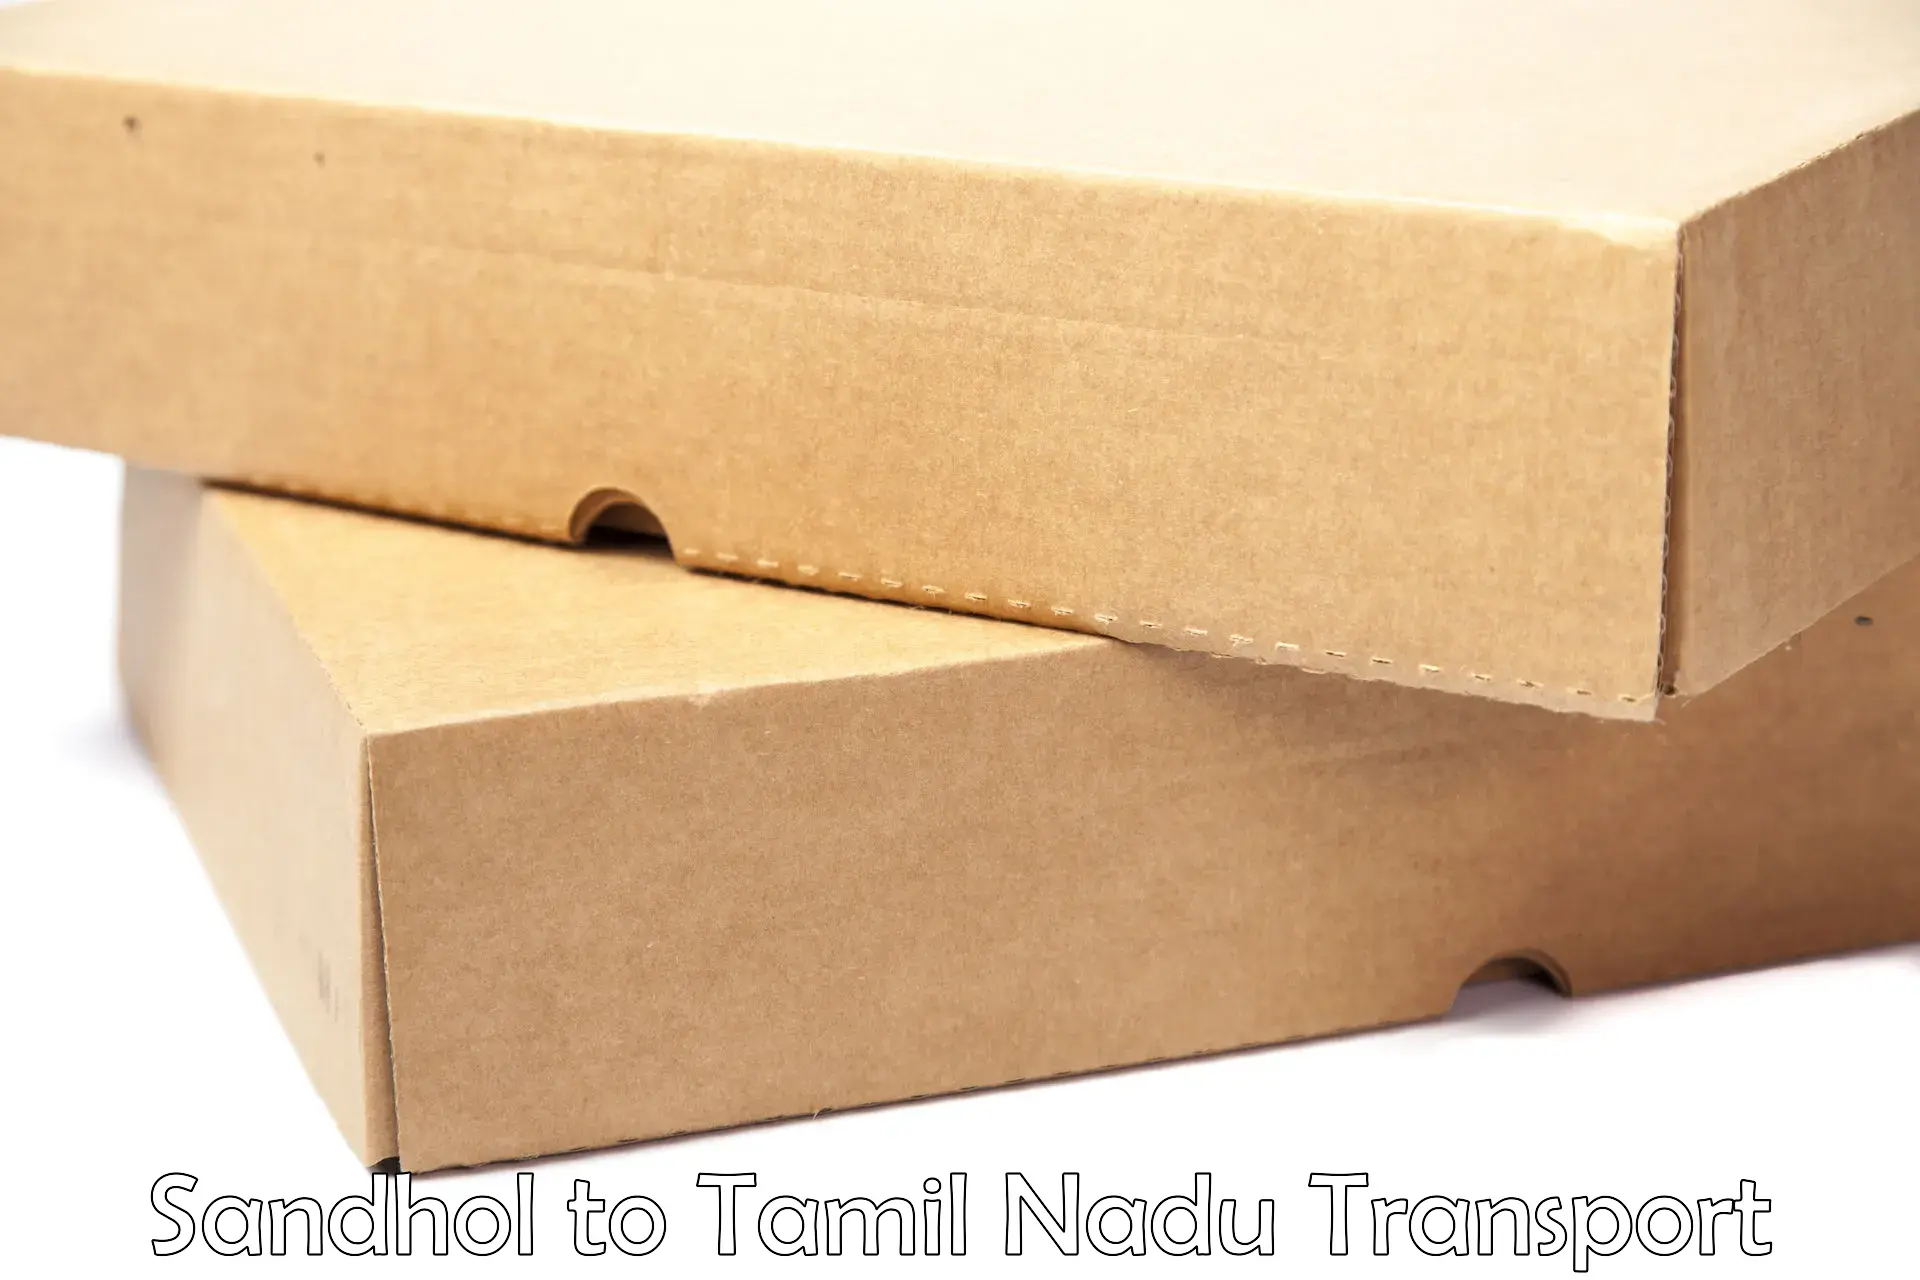 Part load transport service in India Sandhol to Thuraiyur